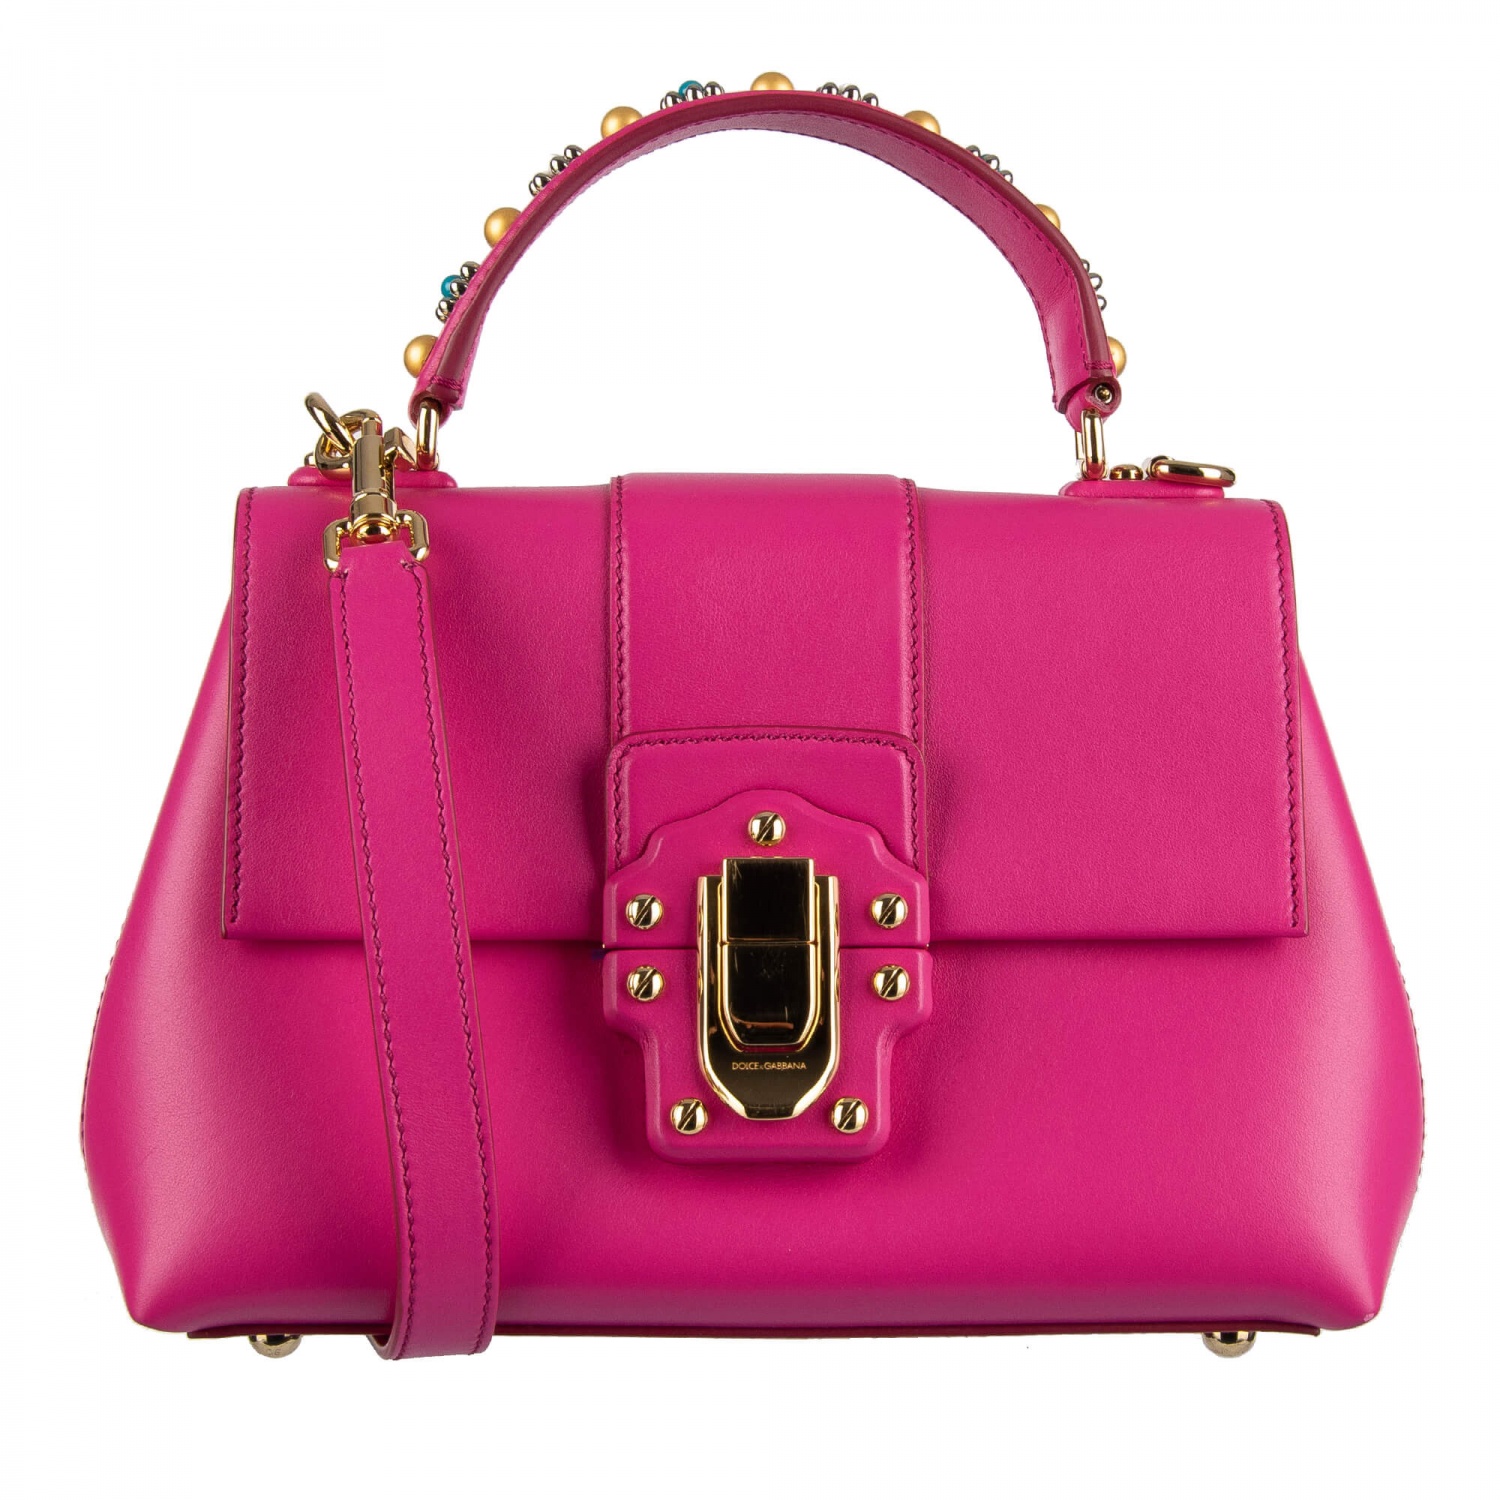 Dolce & Gabbana Bag Shoulder Bag Lucia With Jewellery Handle Pink 08989 ...